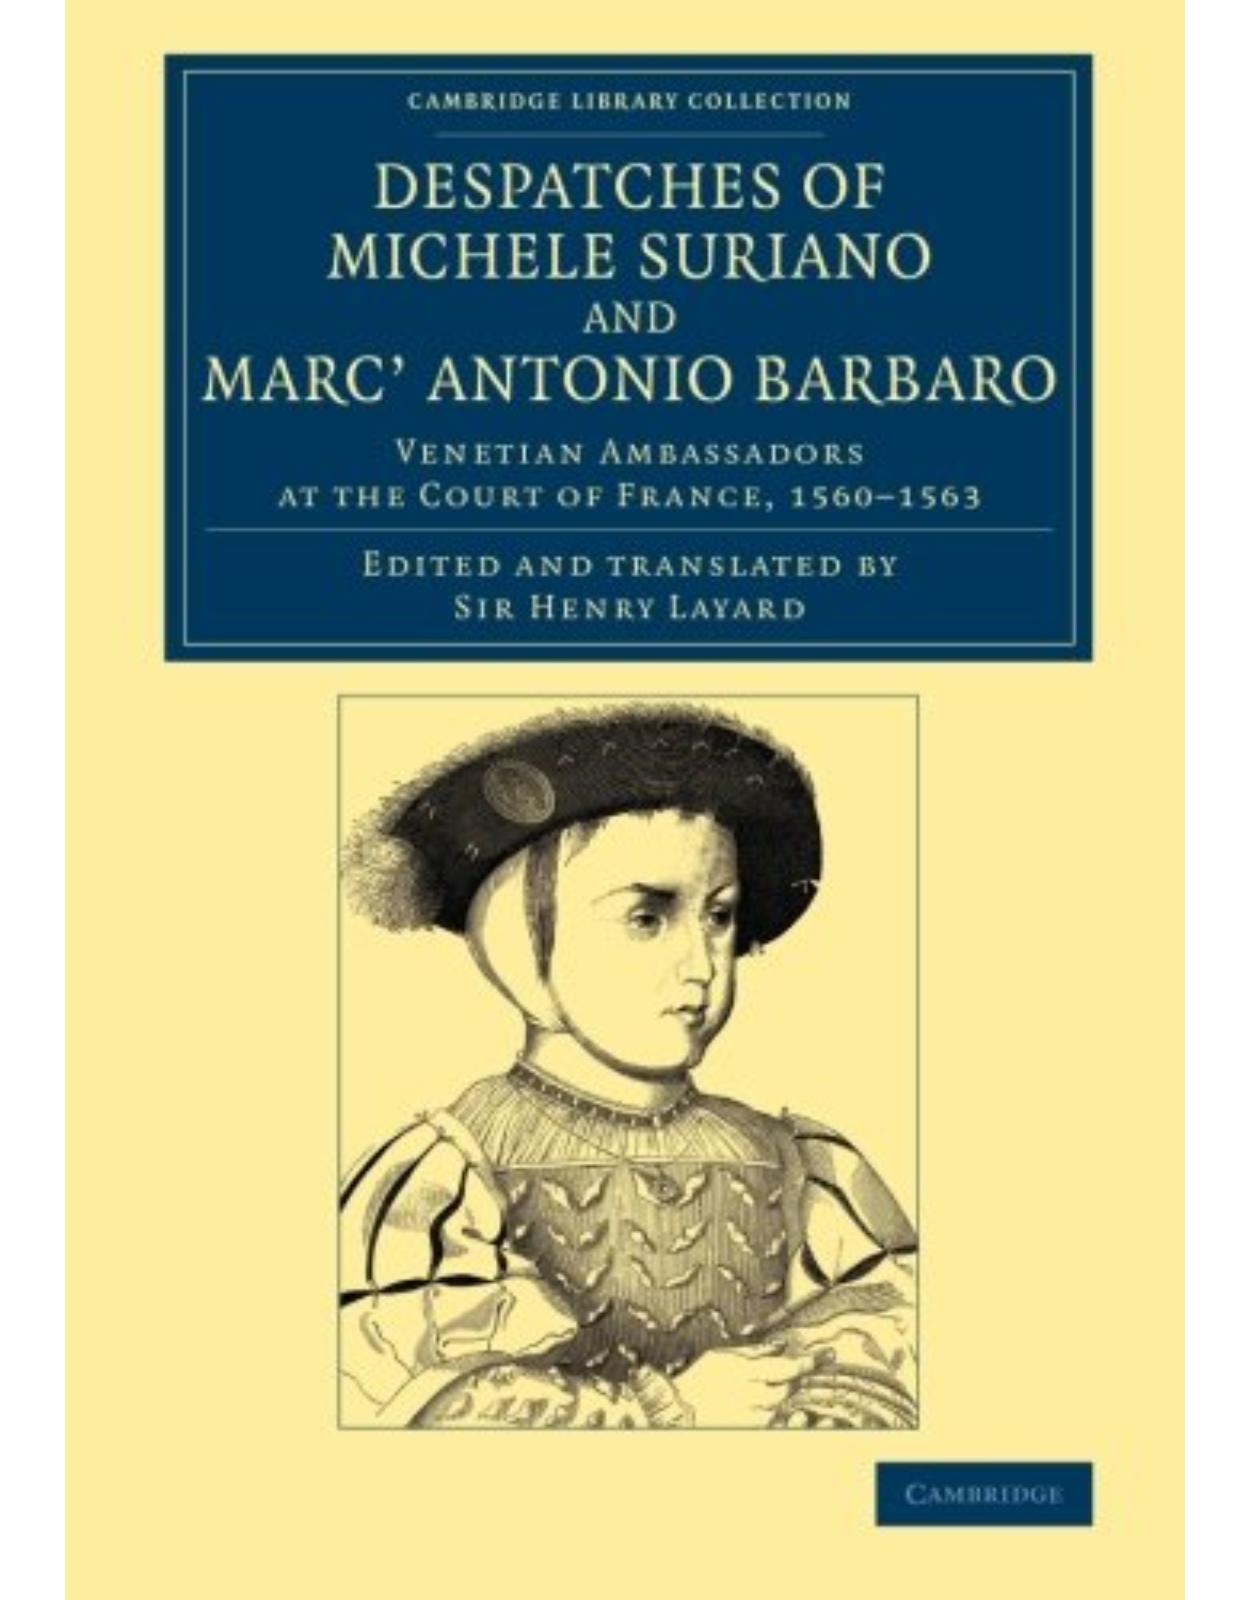 Despatches of Michele Suriano and MarcÂ’ Antonio Barbaro: Venetian Ambassadors at the Court of France, 1560-1563 (Cambridge Library Collection - European History)